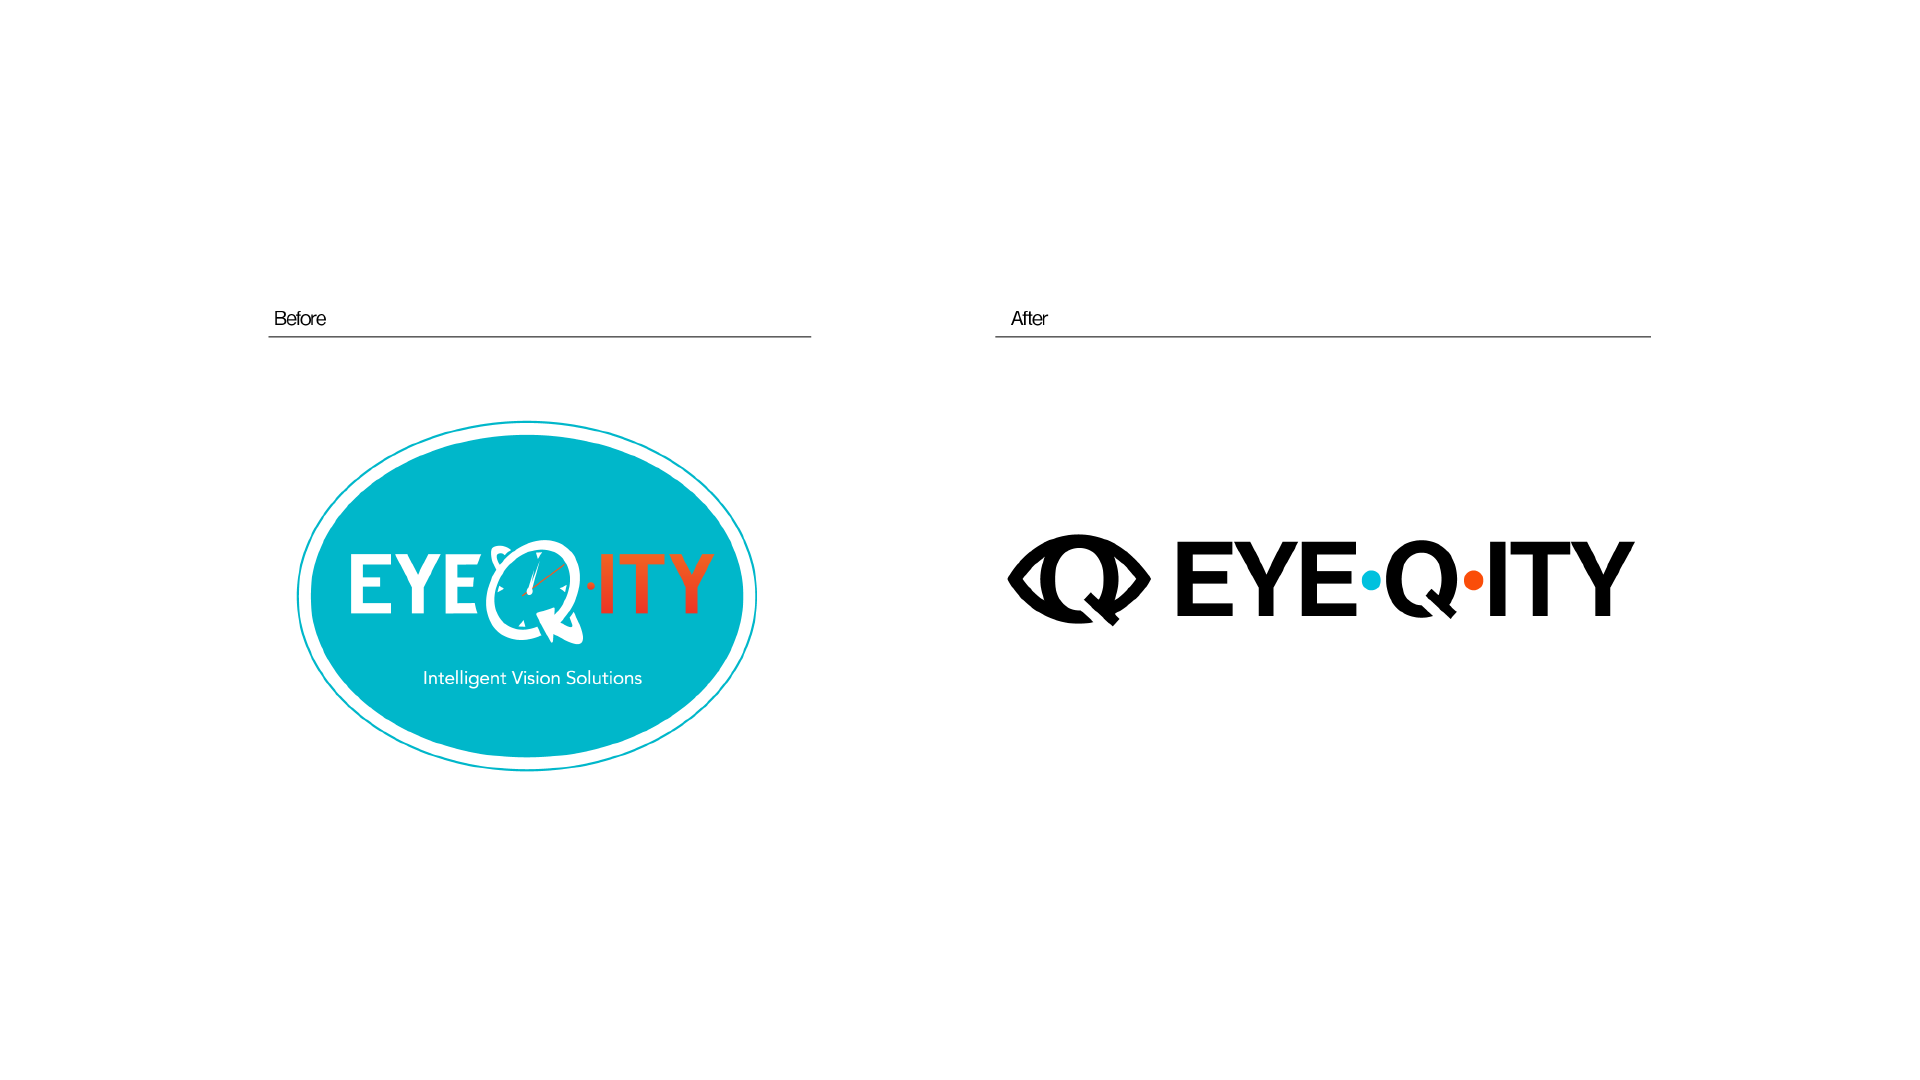 The old EYEQ.ITY logo is on the left. The “eye-q” is in white, the “ity” is in orange, and both are encircled in teal. The “Q” is shaped like a clock. The new logo is on the right. The text is all one color with a teal and orange dot on either side of the “Q.”